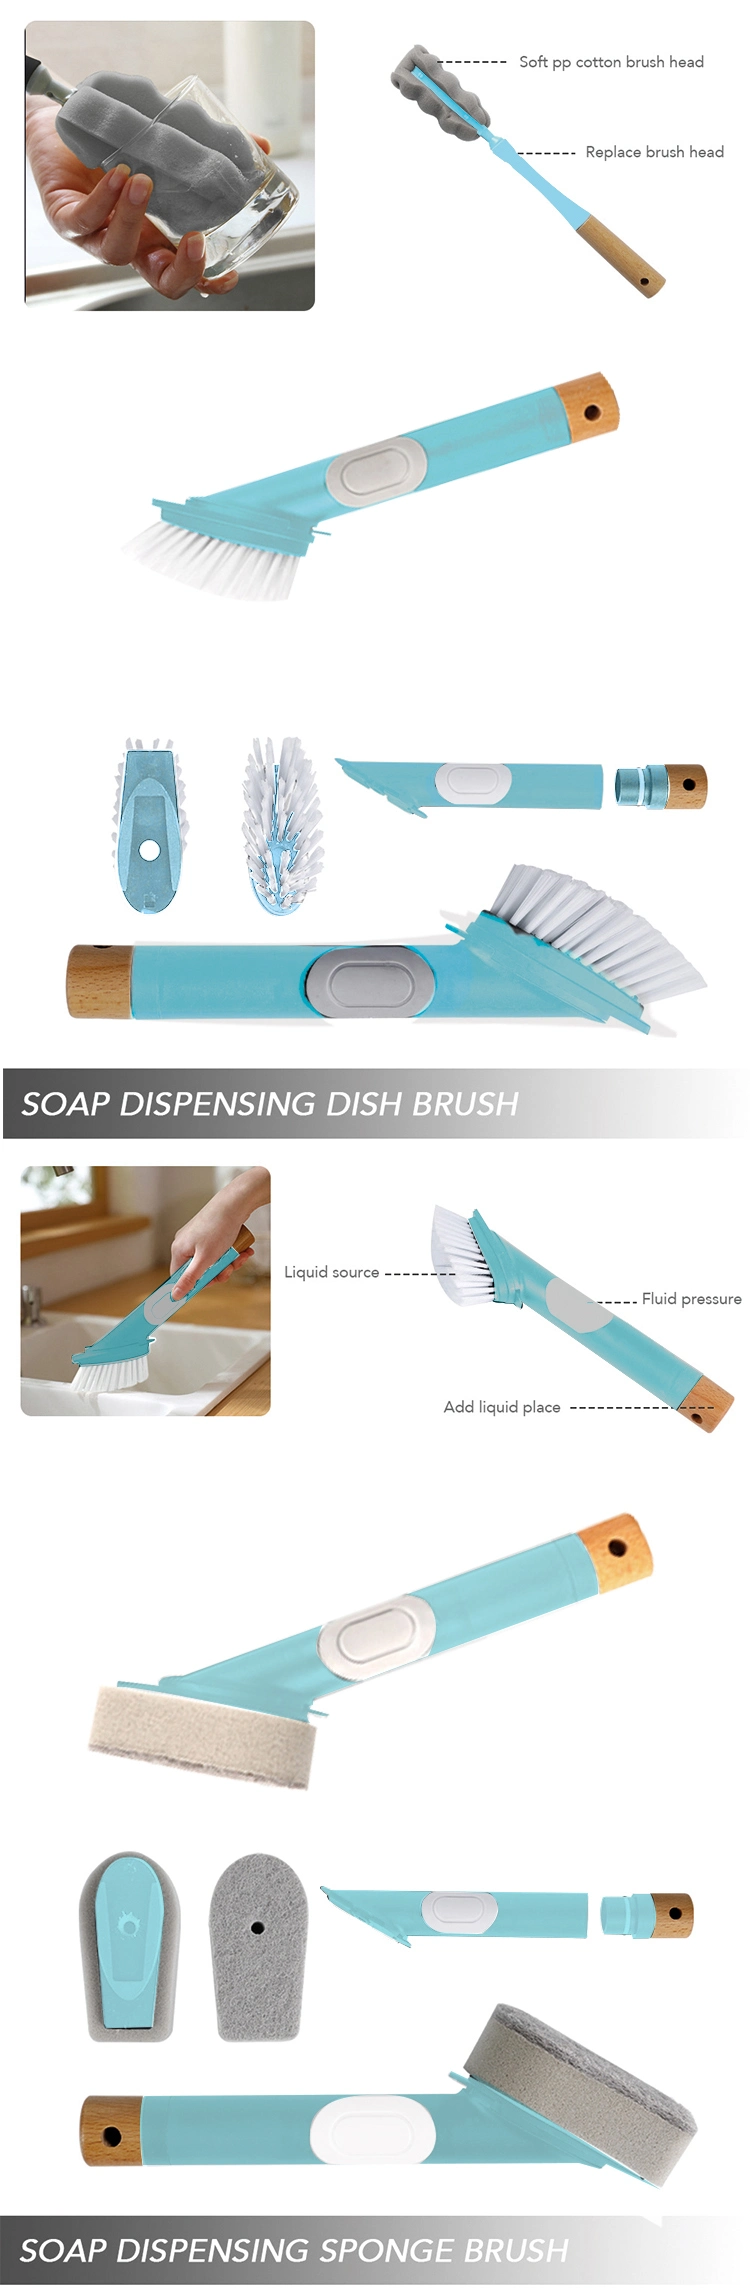 Kitchen Cleaning Tools Long Handle Kitchen Soap Dispenser Cleaning Brushes Set with Removable Dish Brush Head Sponge